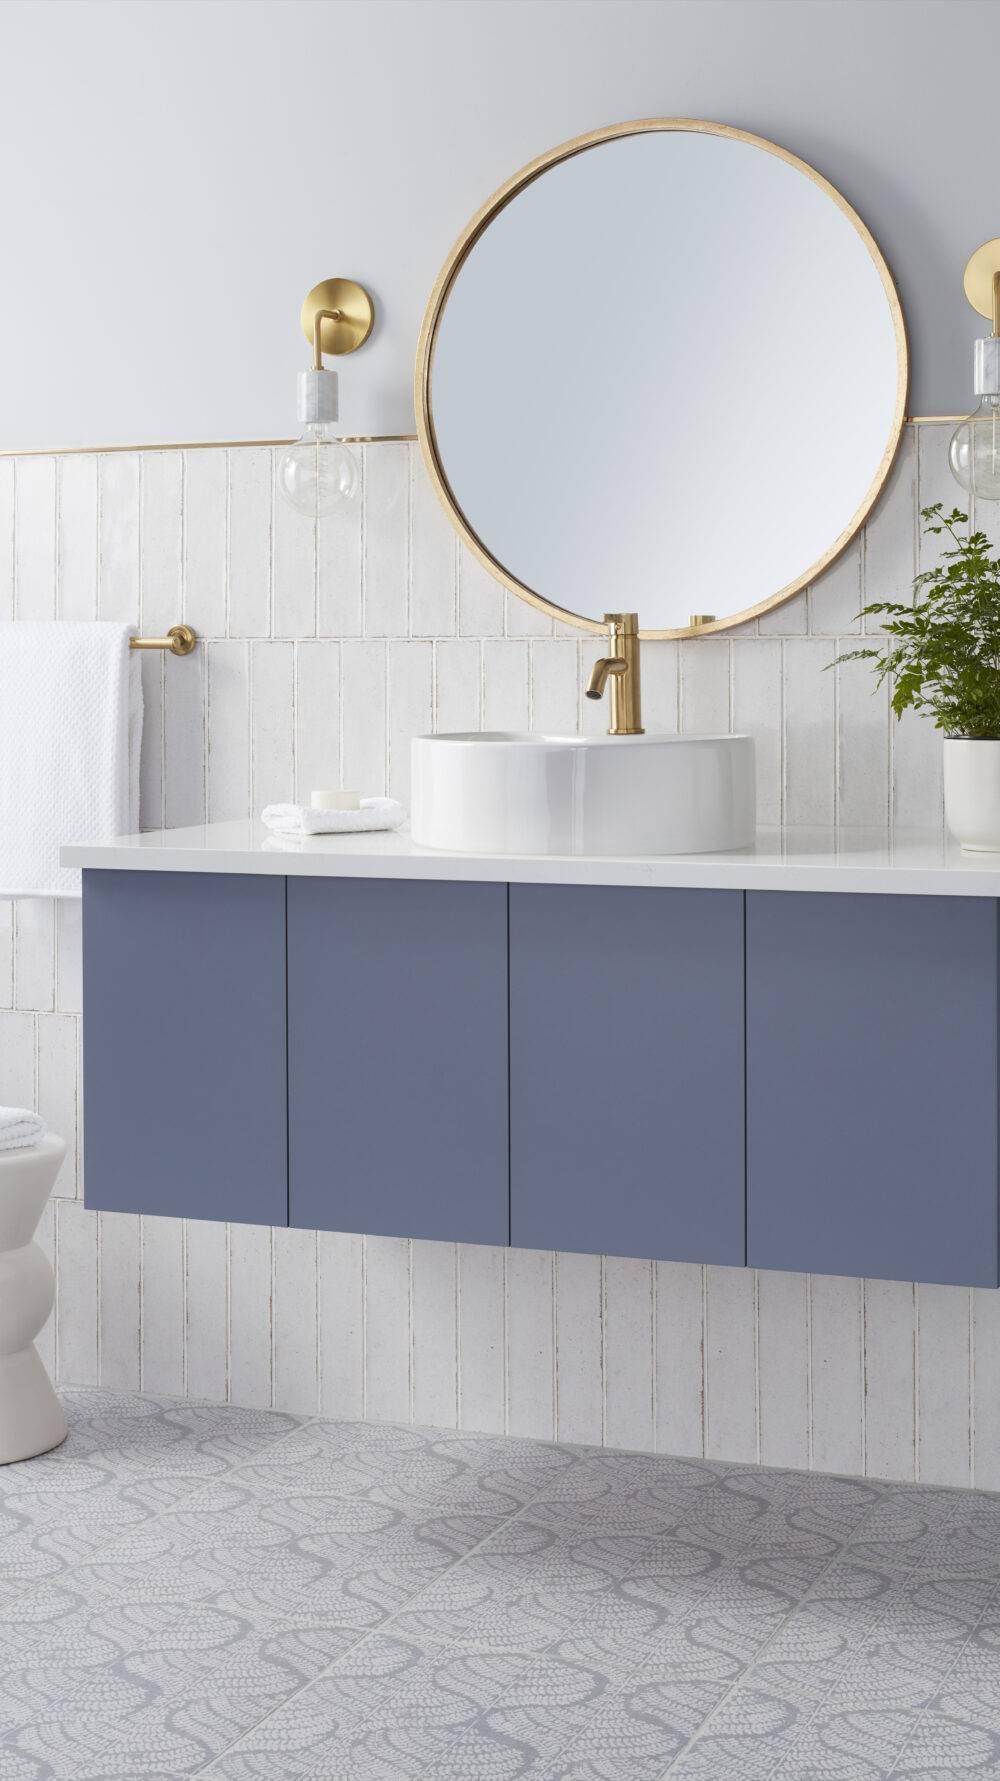 Bathroom with blue patterned floor tile and white handmade-look wall tile with gold trim and blue vanity.
